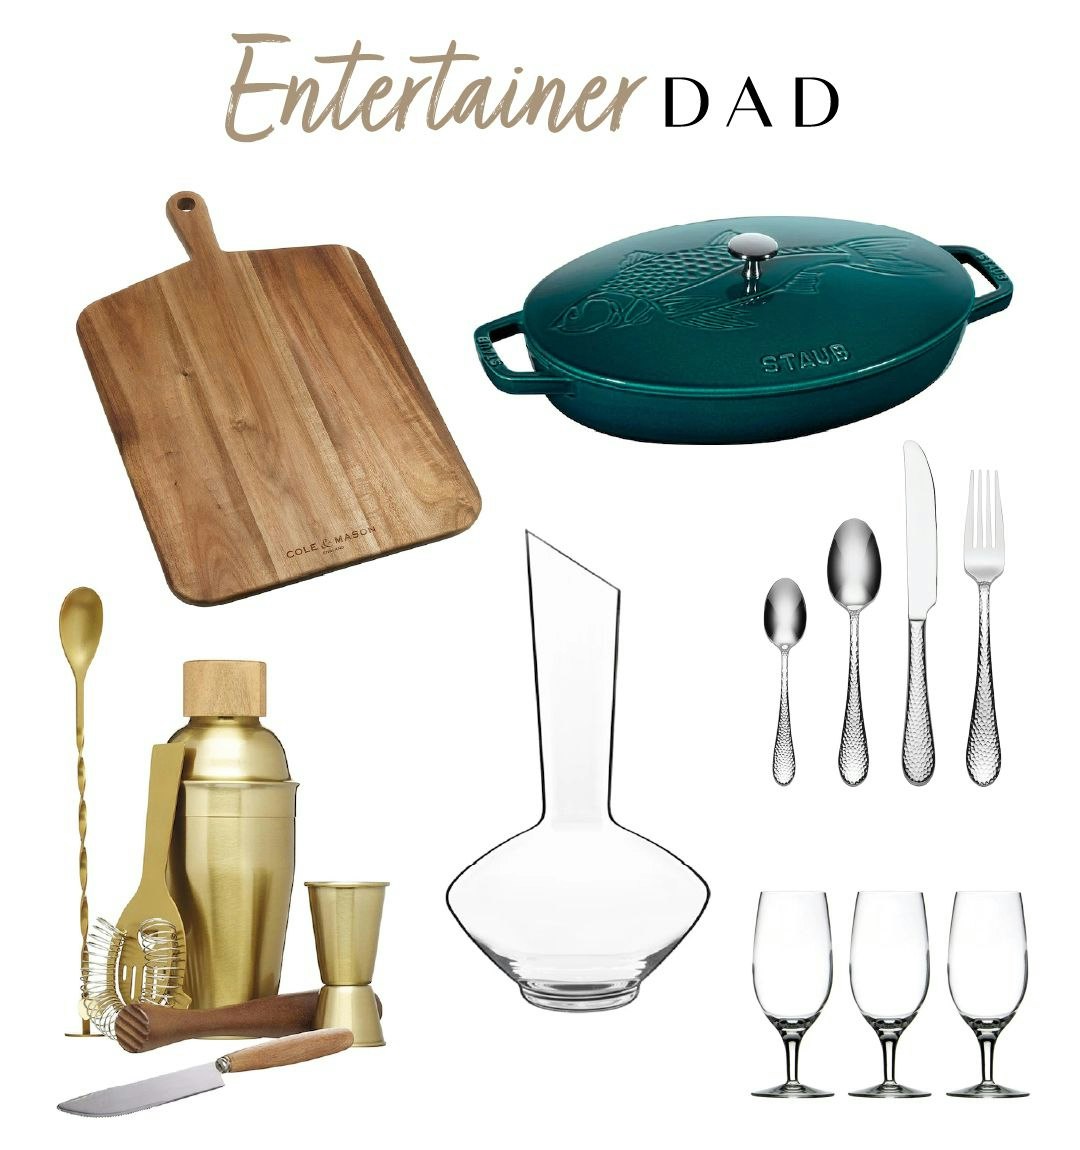 Products picked for the Entertainer Dad 